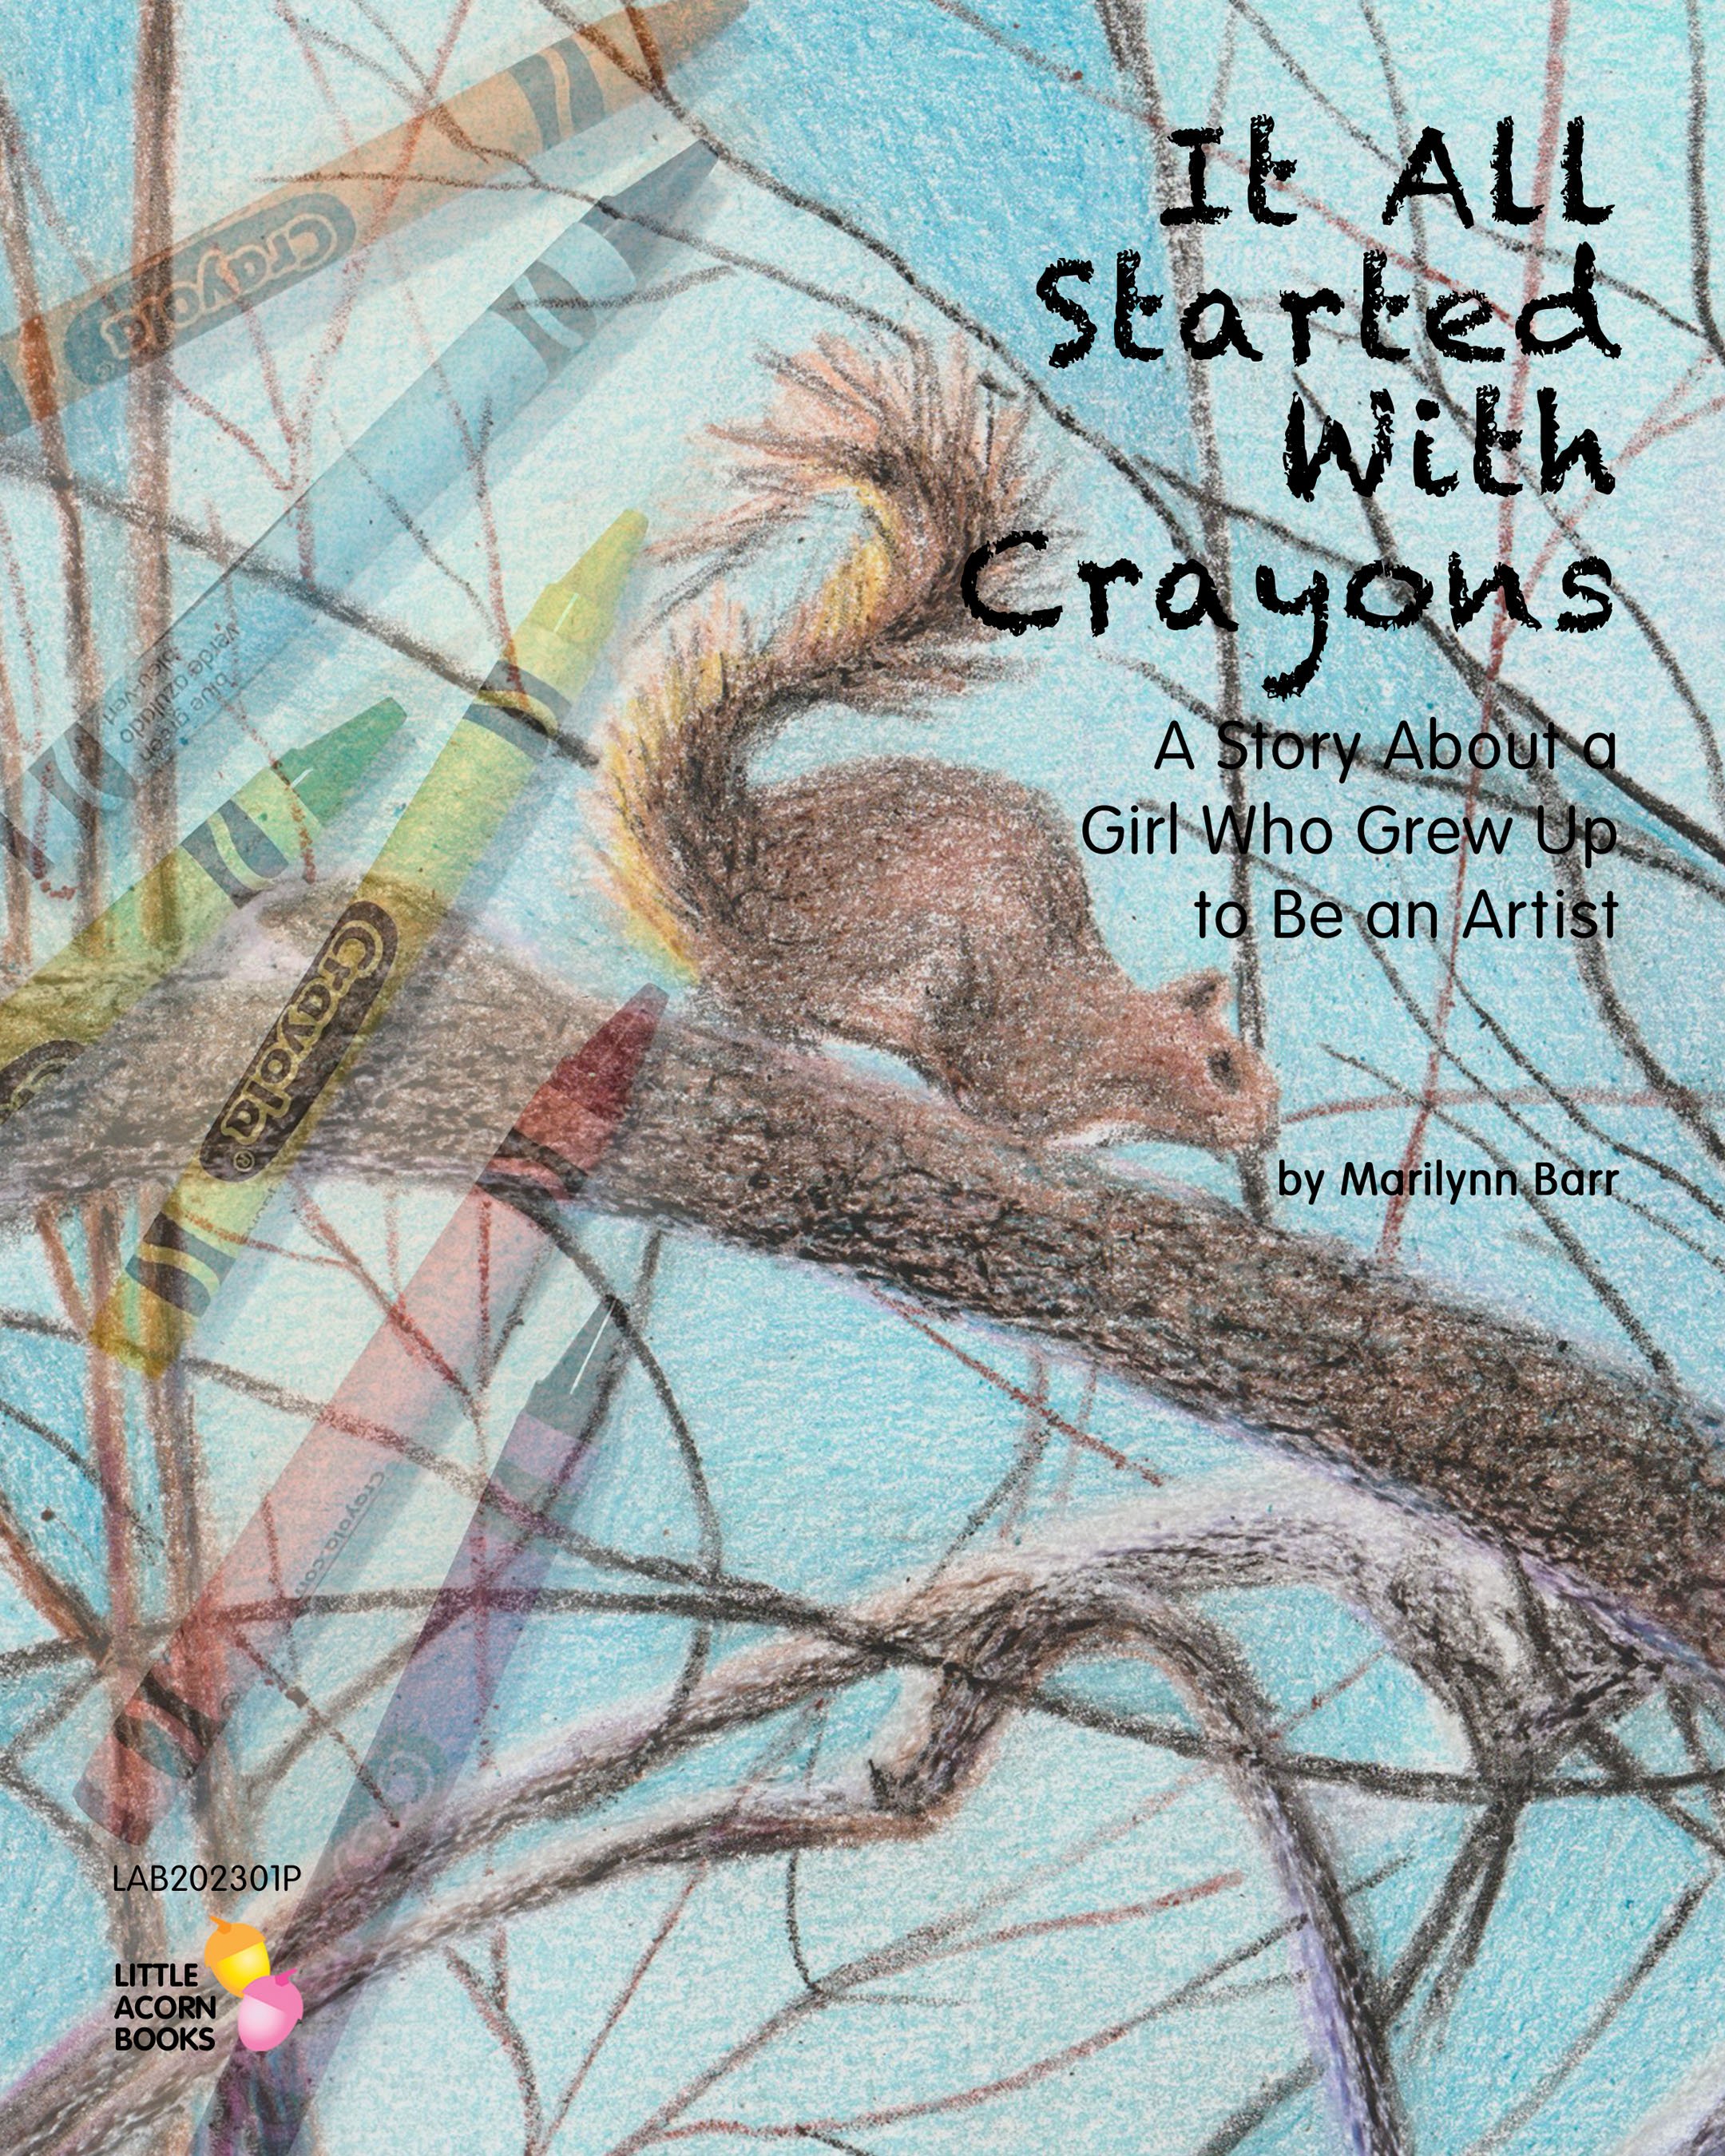 NEW! It All Started With Crayons